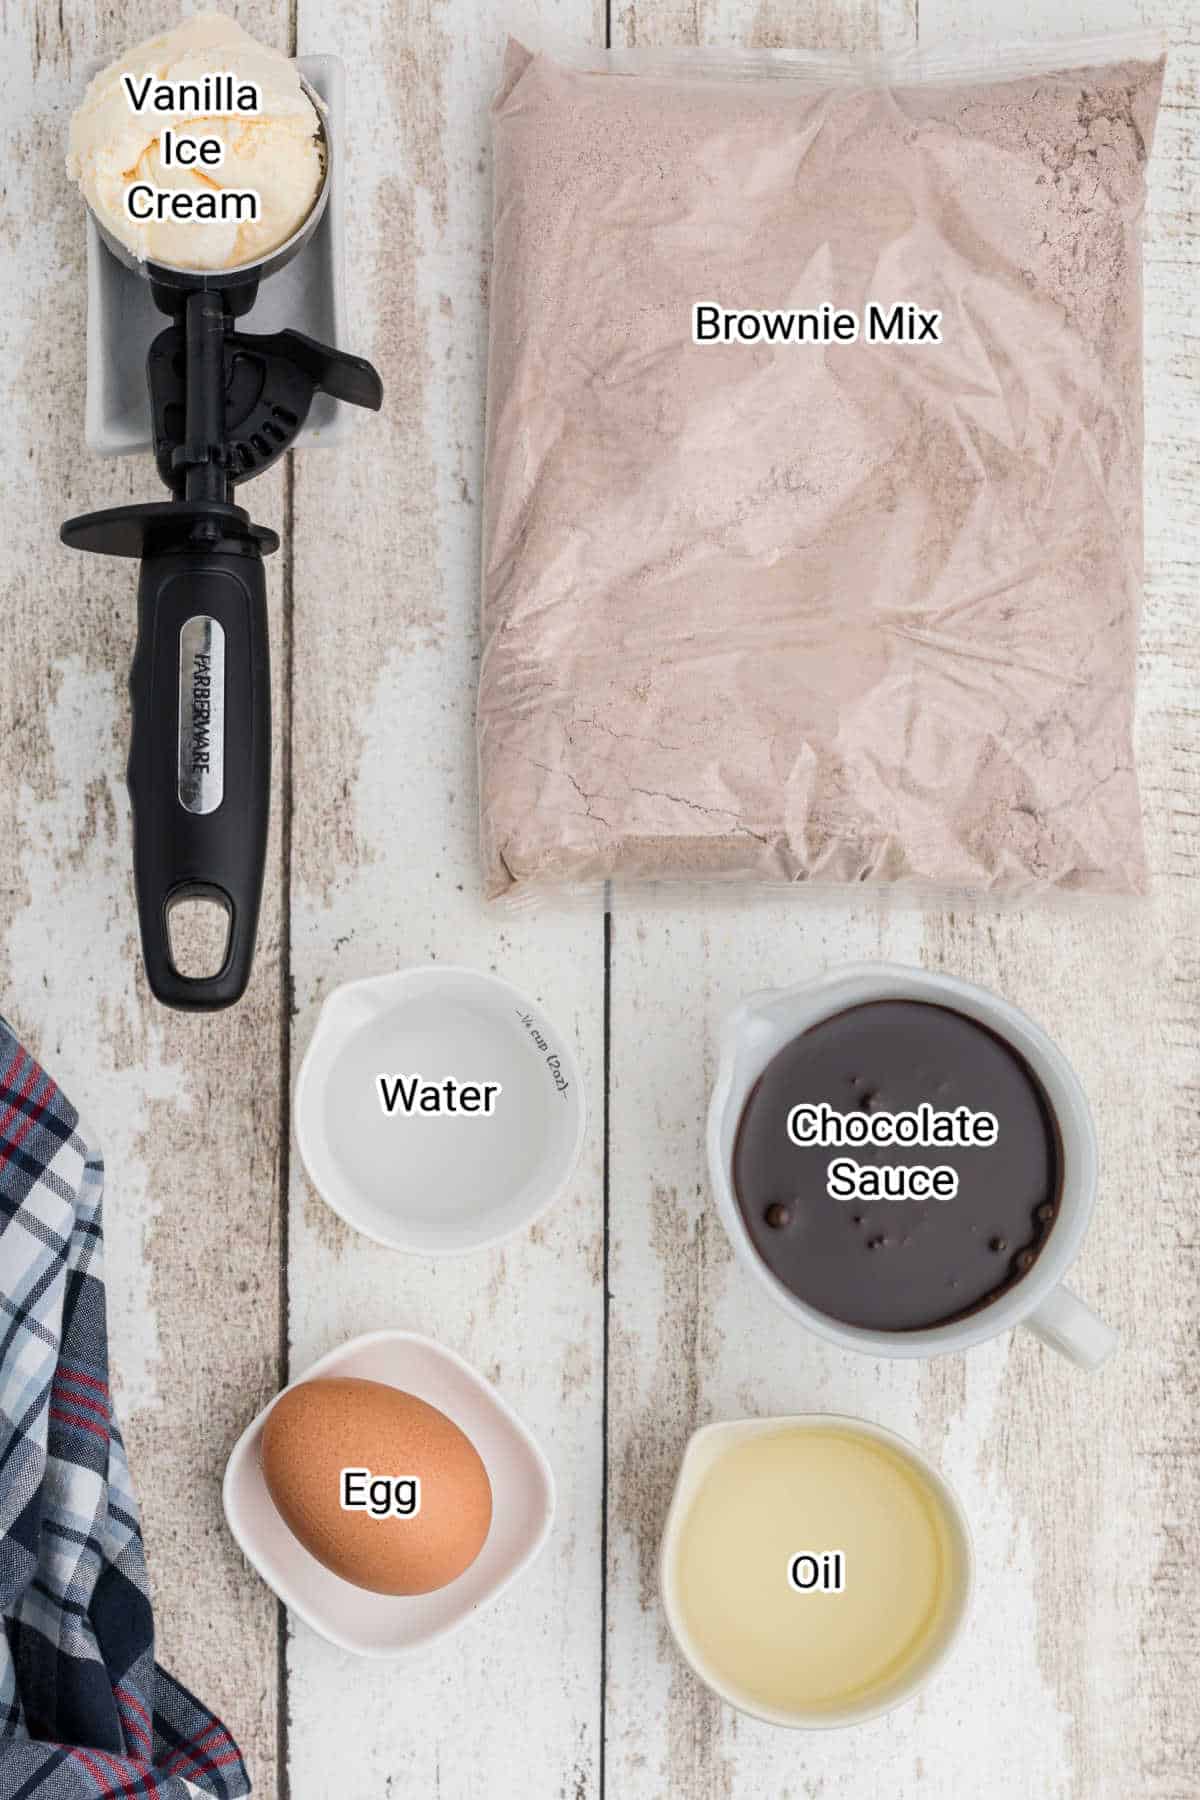 ingredients for a sizzling brownie all laid out